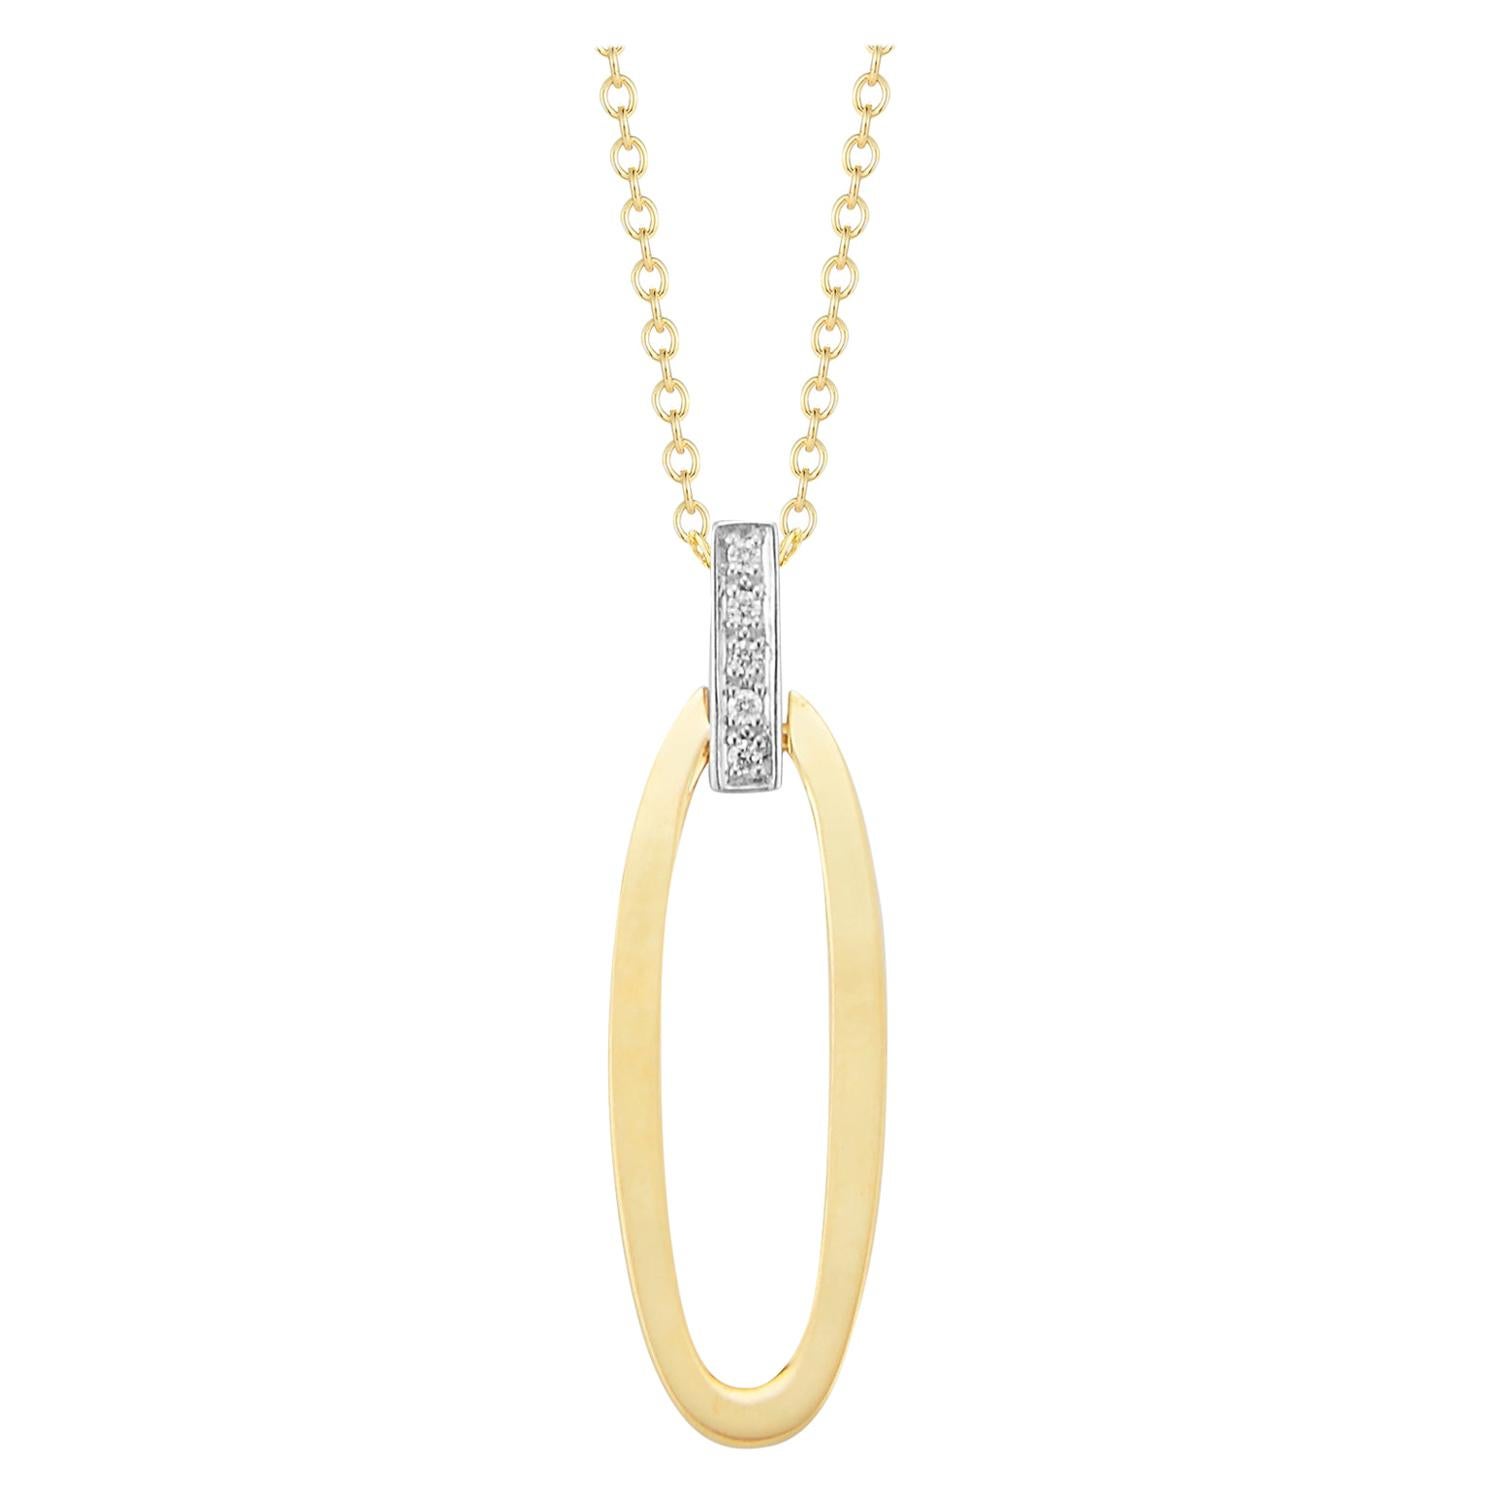 Handcrafted 14 Karat Yellow Gold Open Oval Pendant For Sale